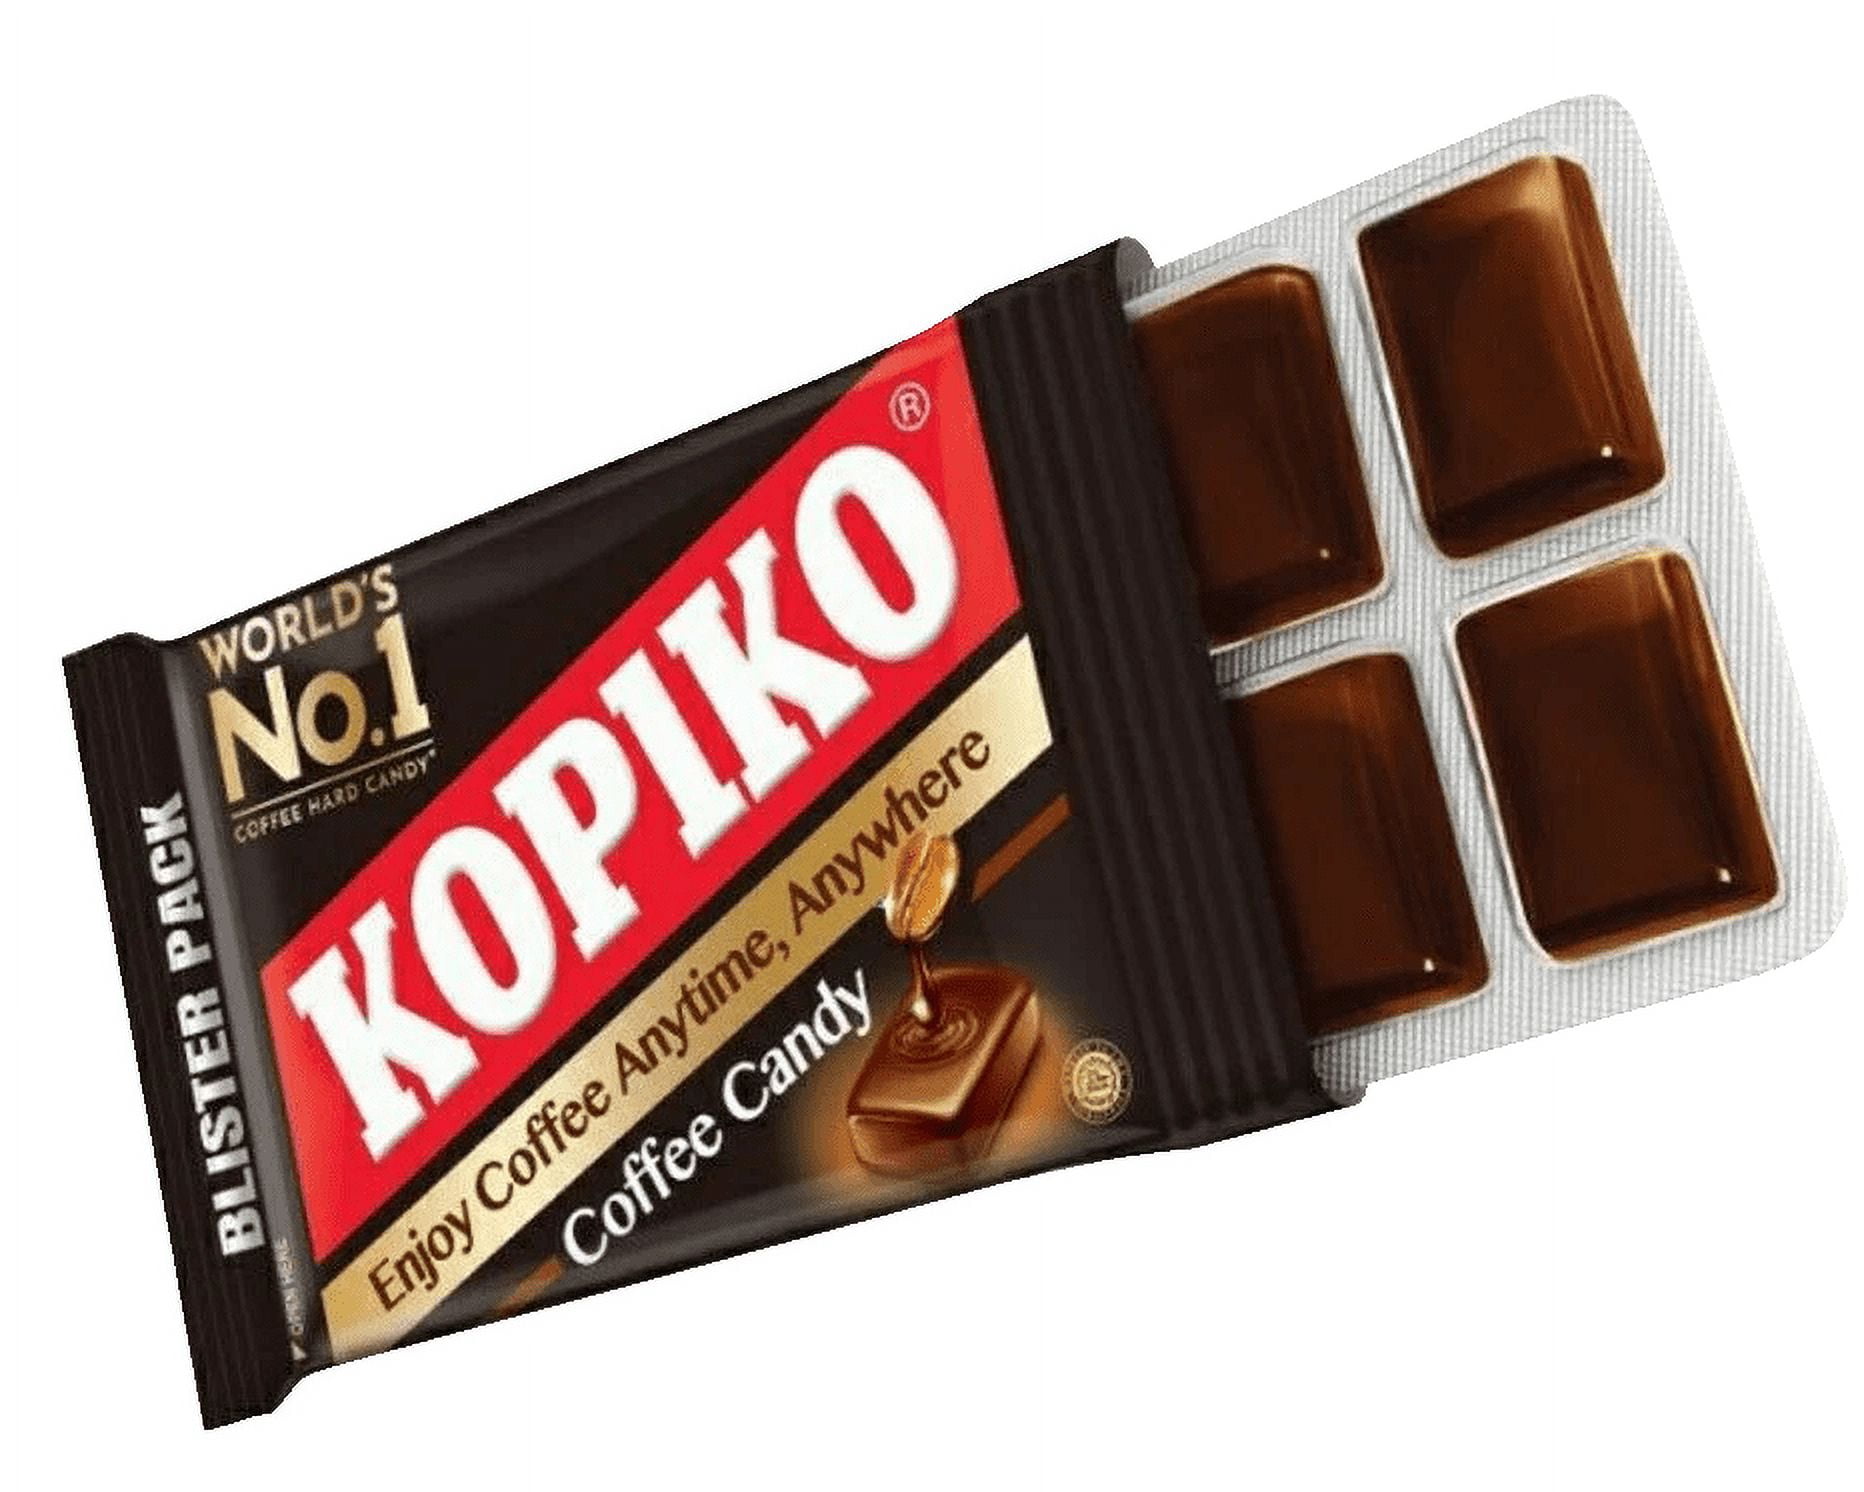 KOPIKO Coffee Candy in BLISTER PACK – 24 x 1.13 oz